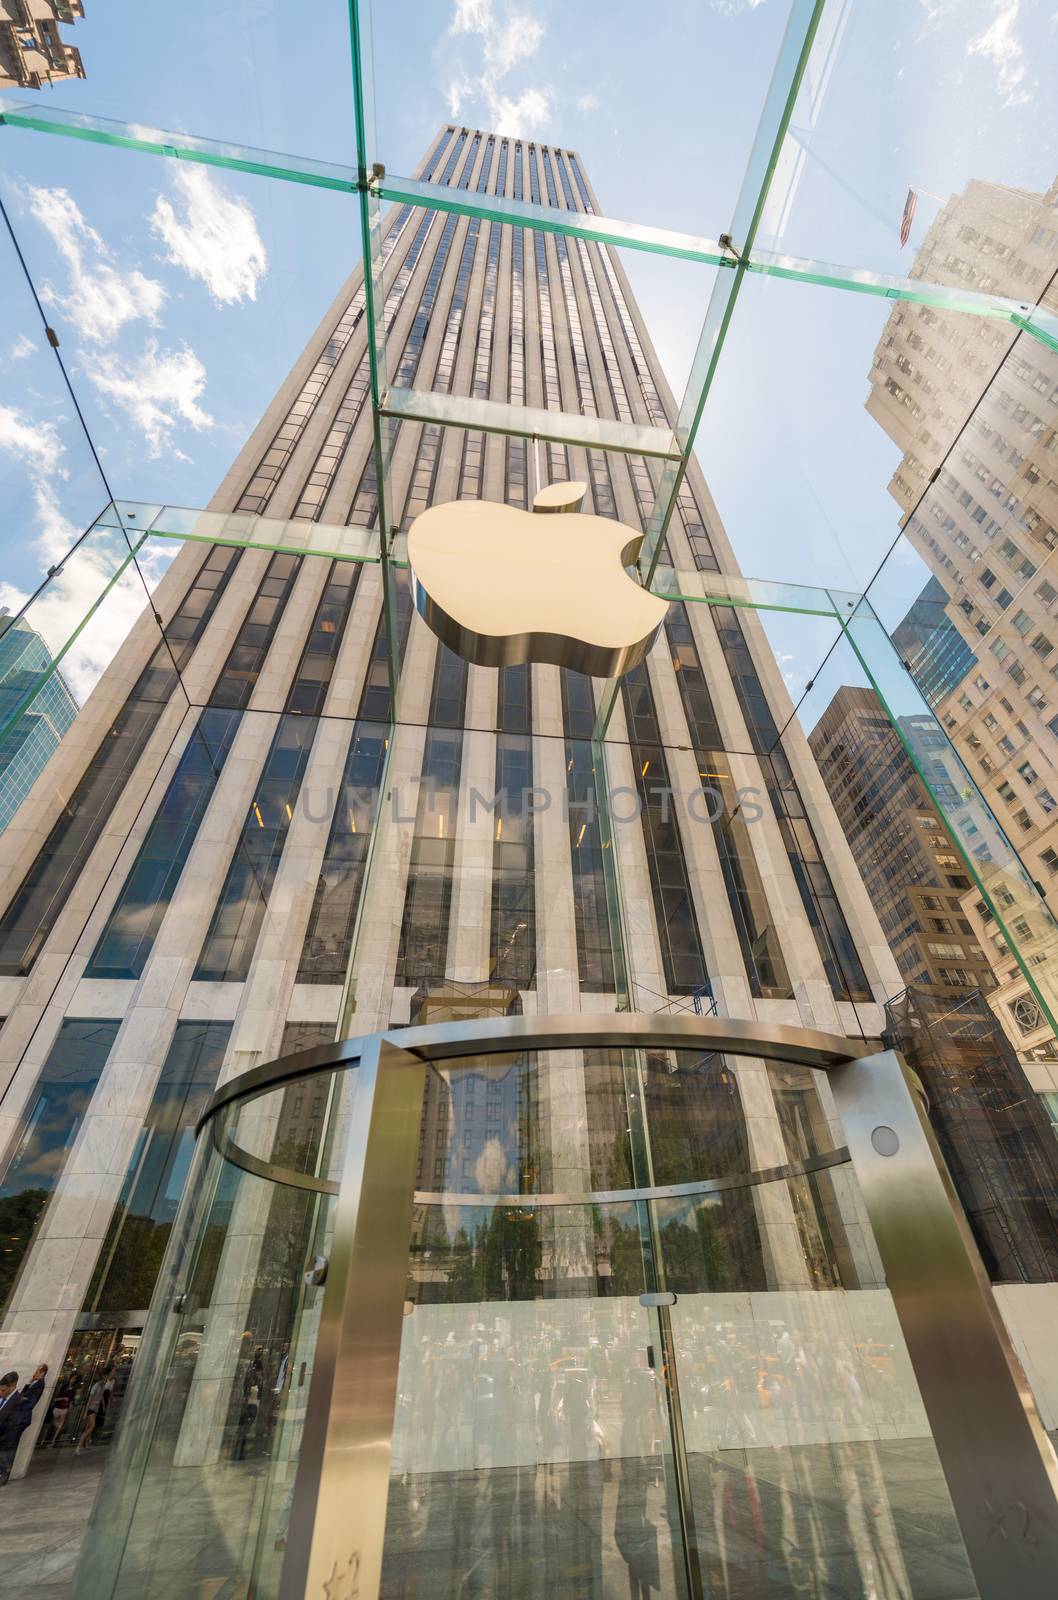 NEW YORK CITY - MAY 14, 2013: Apple Store on the Fifth Avenue. Apple has more than 400 retail stores in 14 countries.